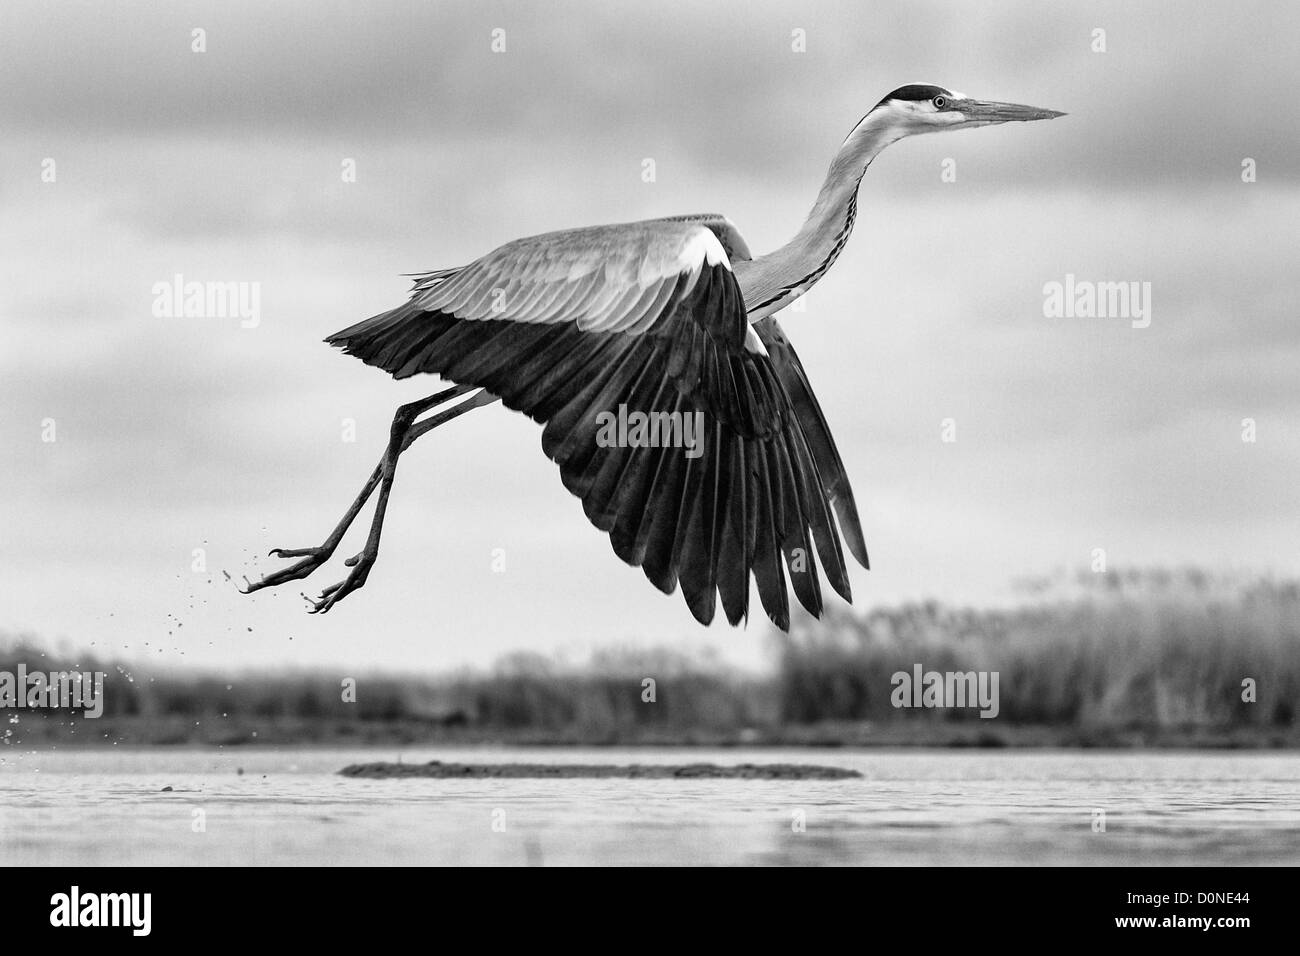 Black and white image of a low flying grey heron side-on over a lake Stock Photo